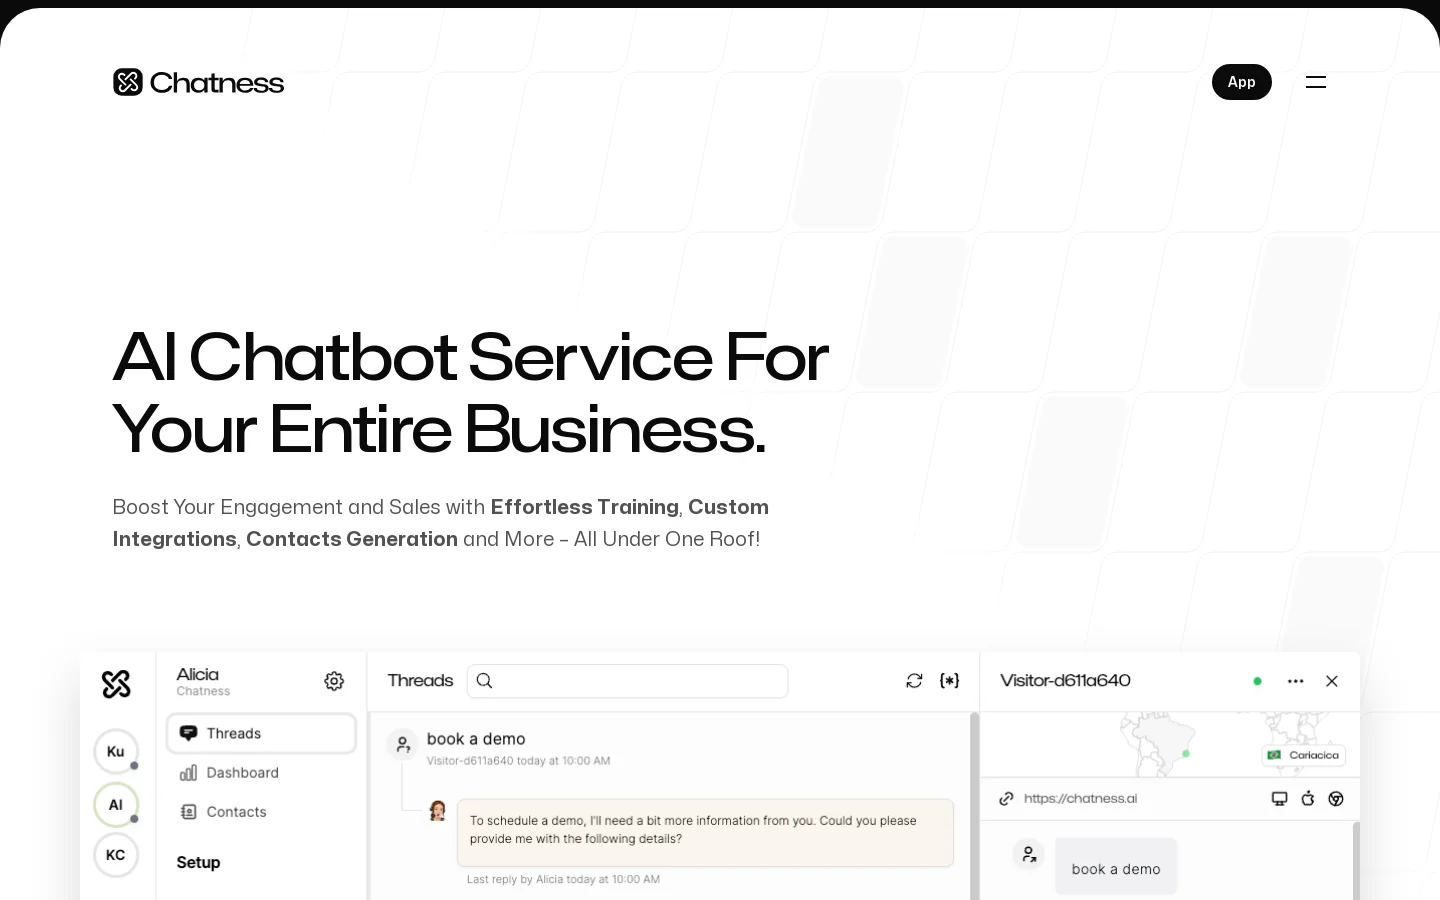 Embedded Chatbots Made Easy